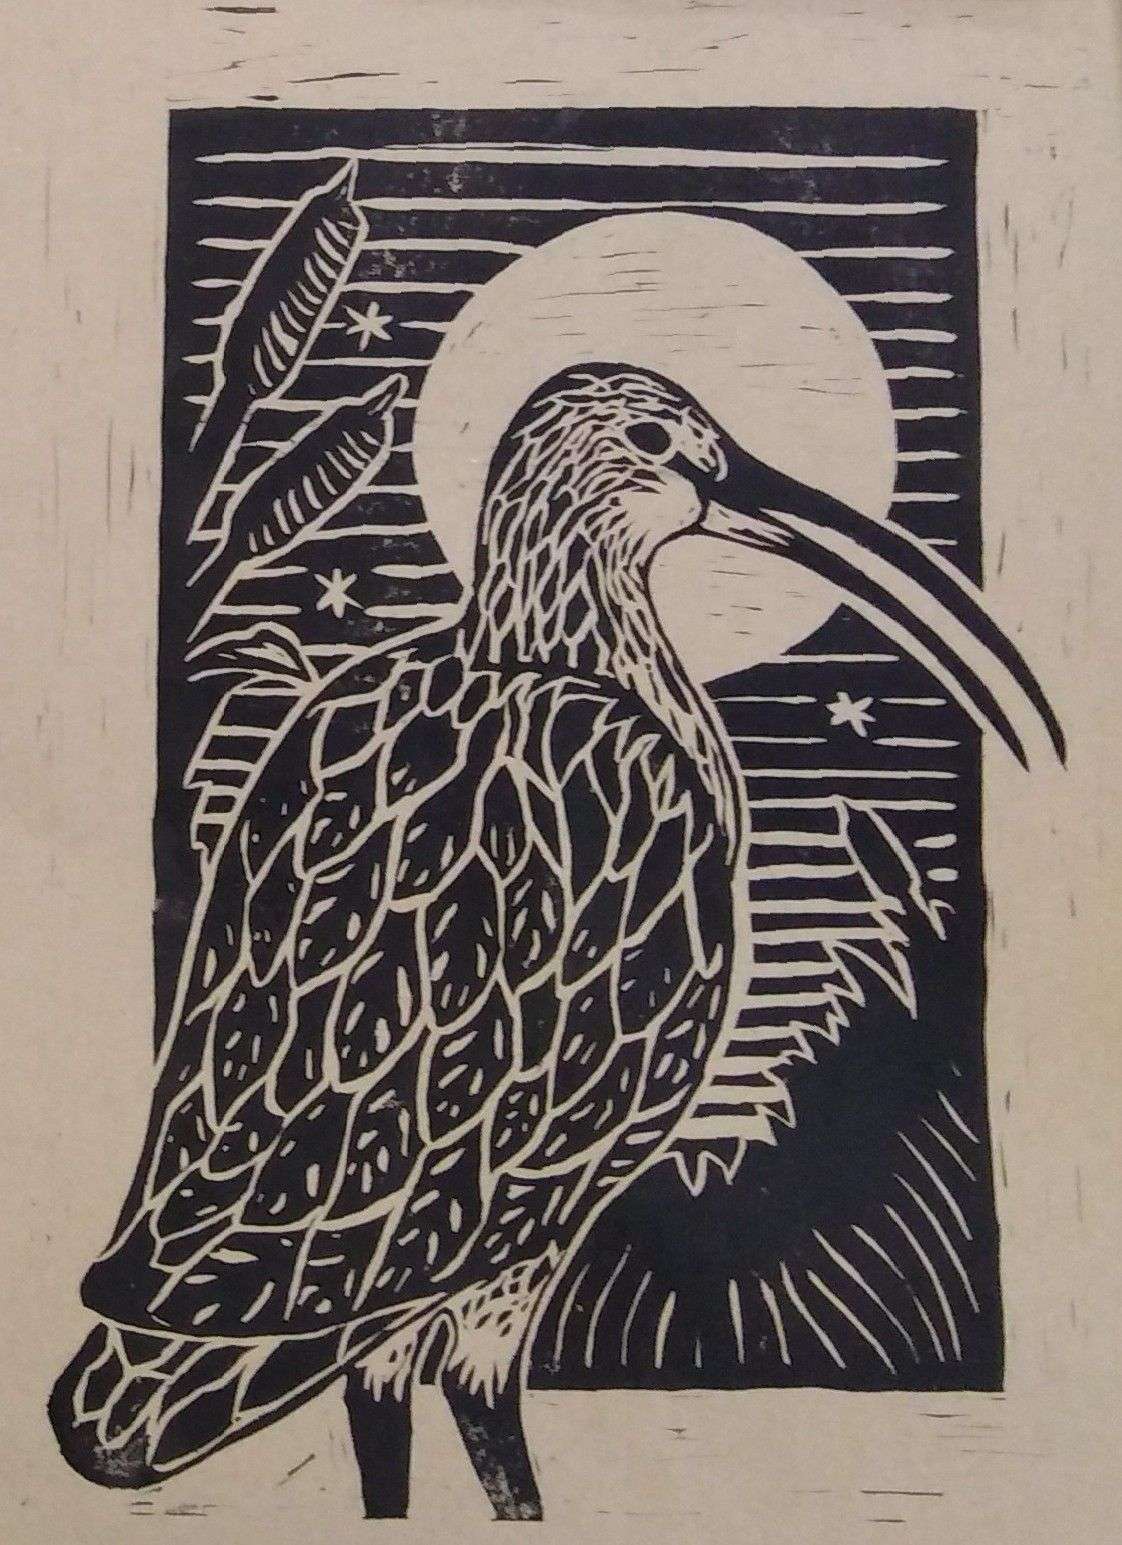 a black and white linocut print of a curlew.  it stands in front of a dark sky that gets lighter at the horizon.  the moon is behind its head, like a halo, and it's surrounded by bulrushes and tall grass.  the background is contained within a frame that the curlew stands outside.